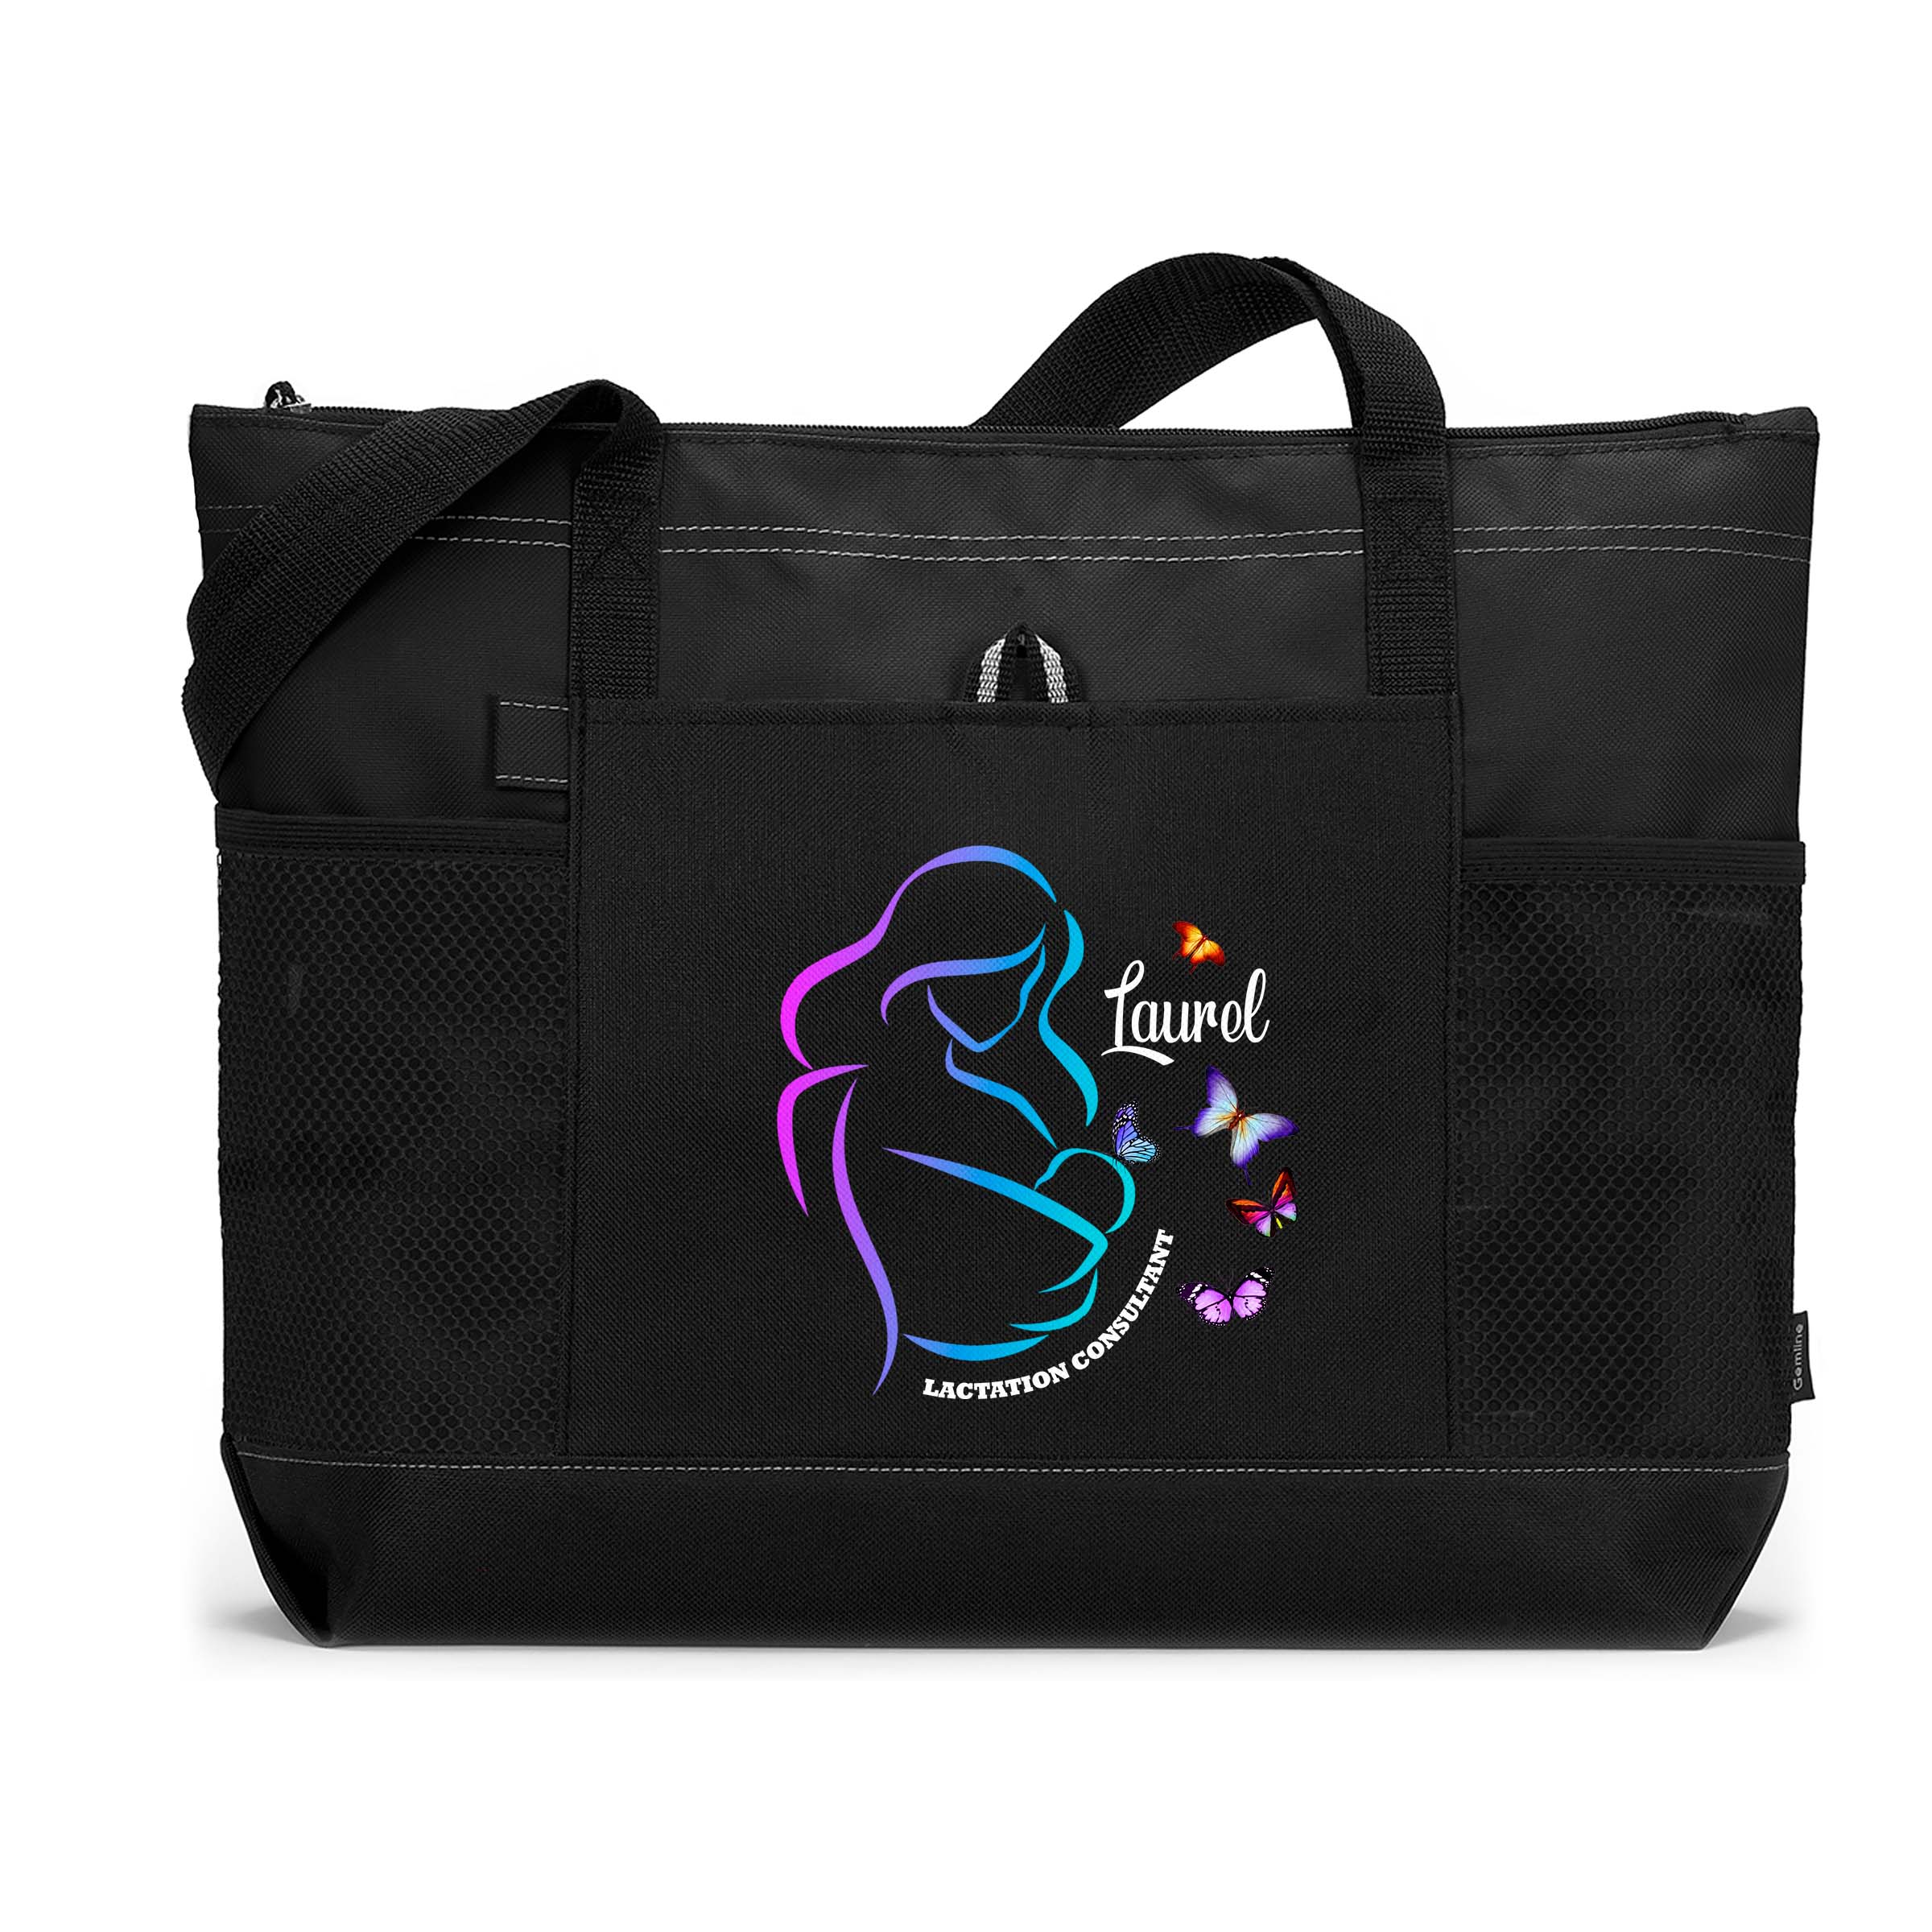 Lactation Consultant Personalized Tote Bag